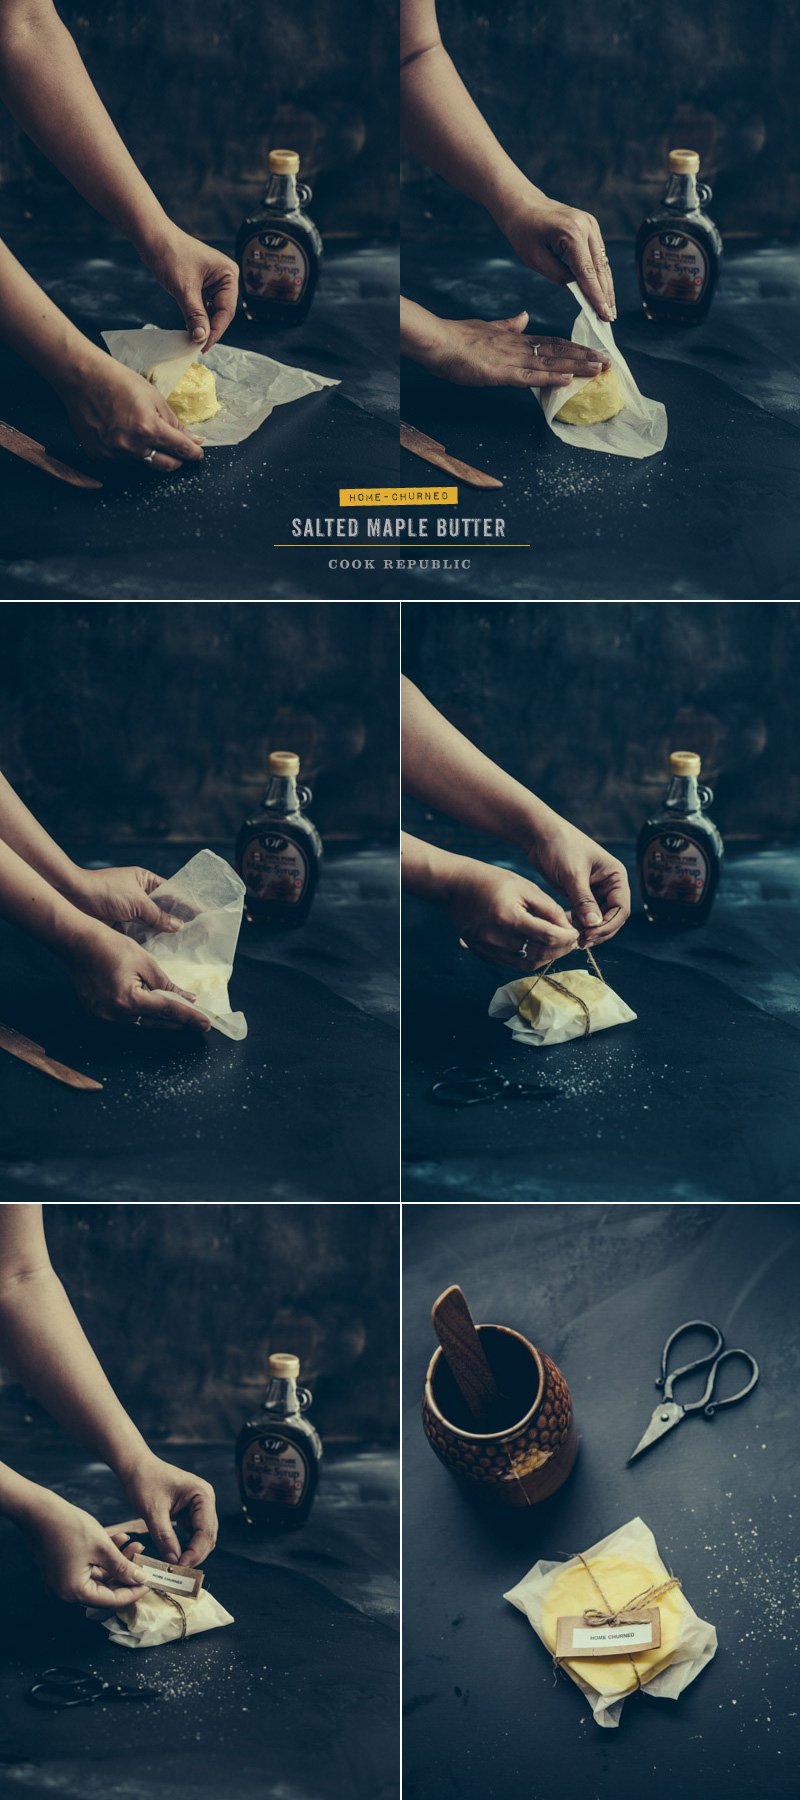 Wrapping Artisanal Home Made 15-Minute Butter - Sneh Roy, photo.